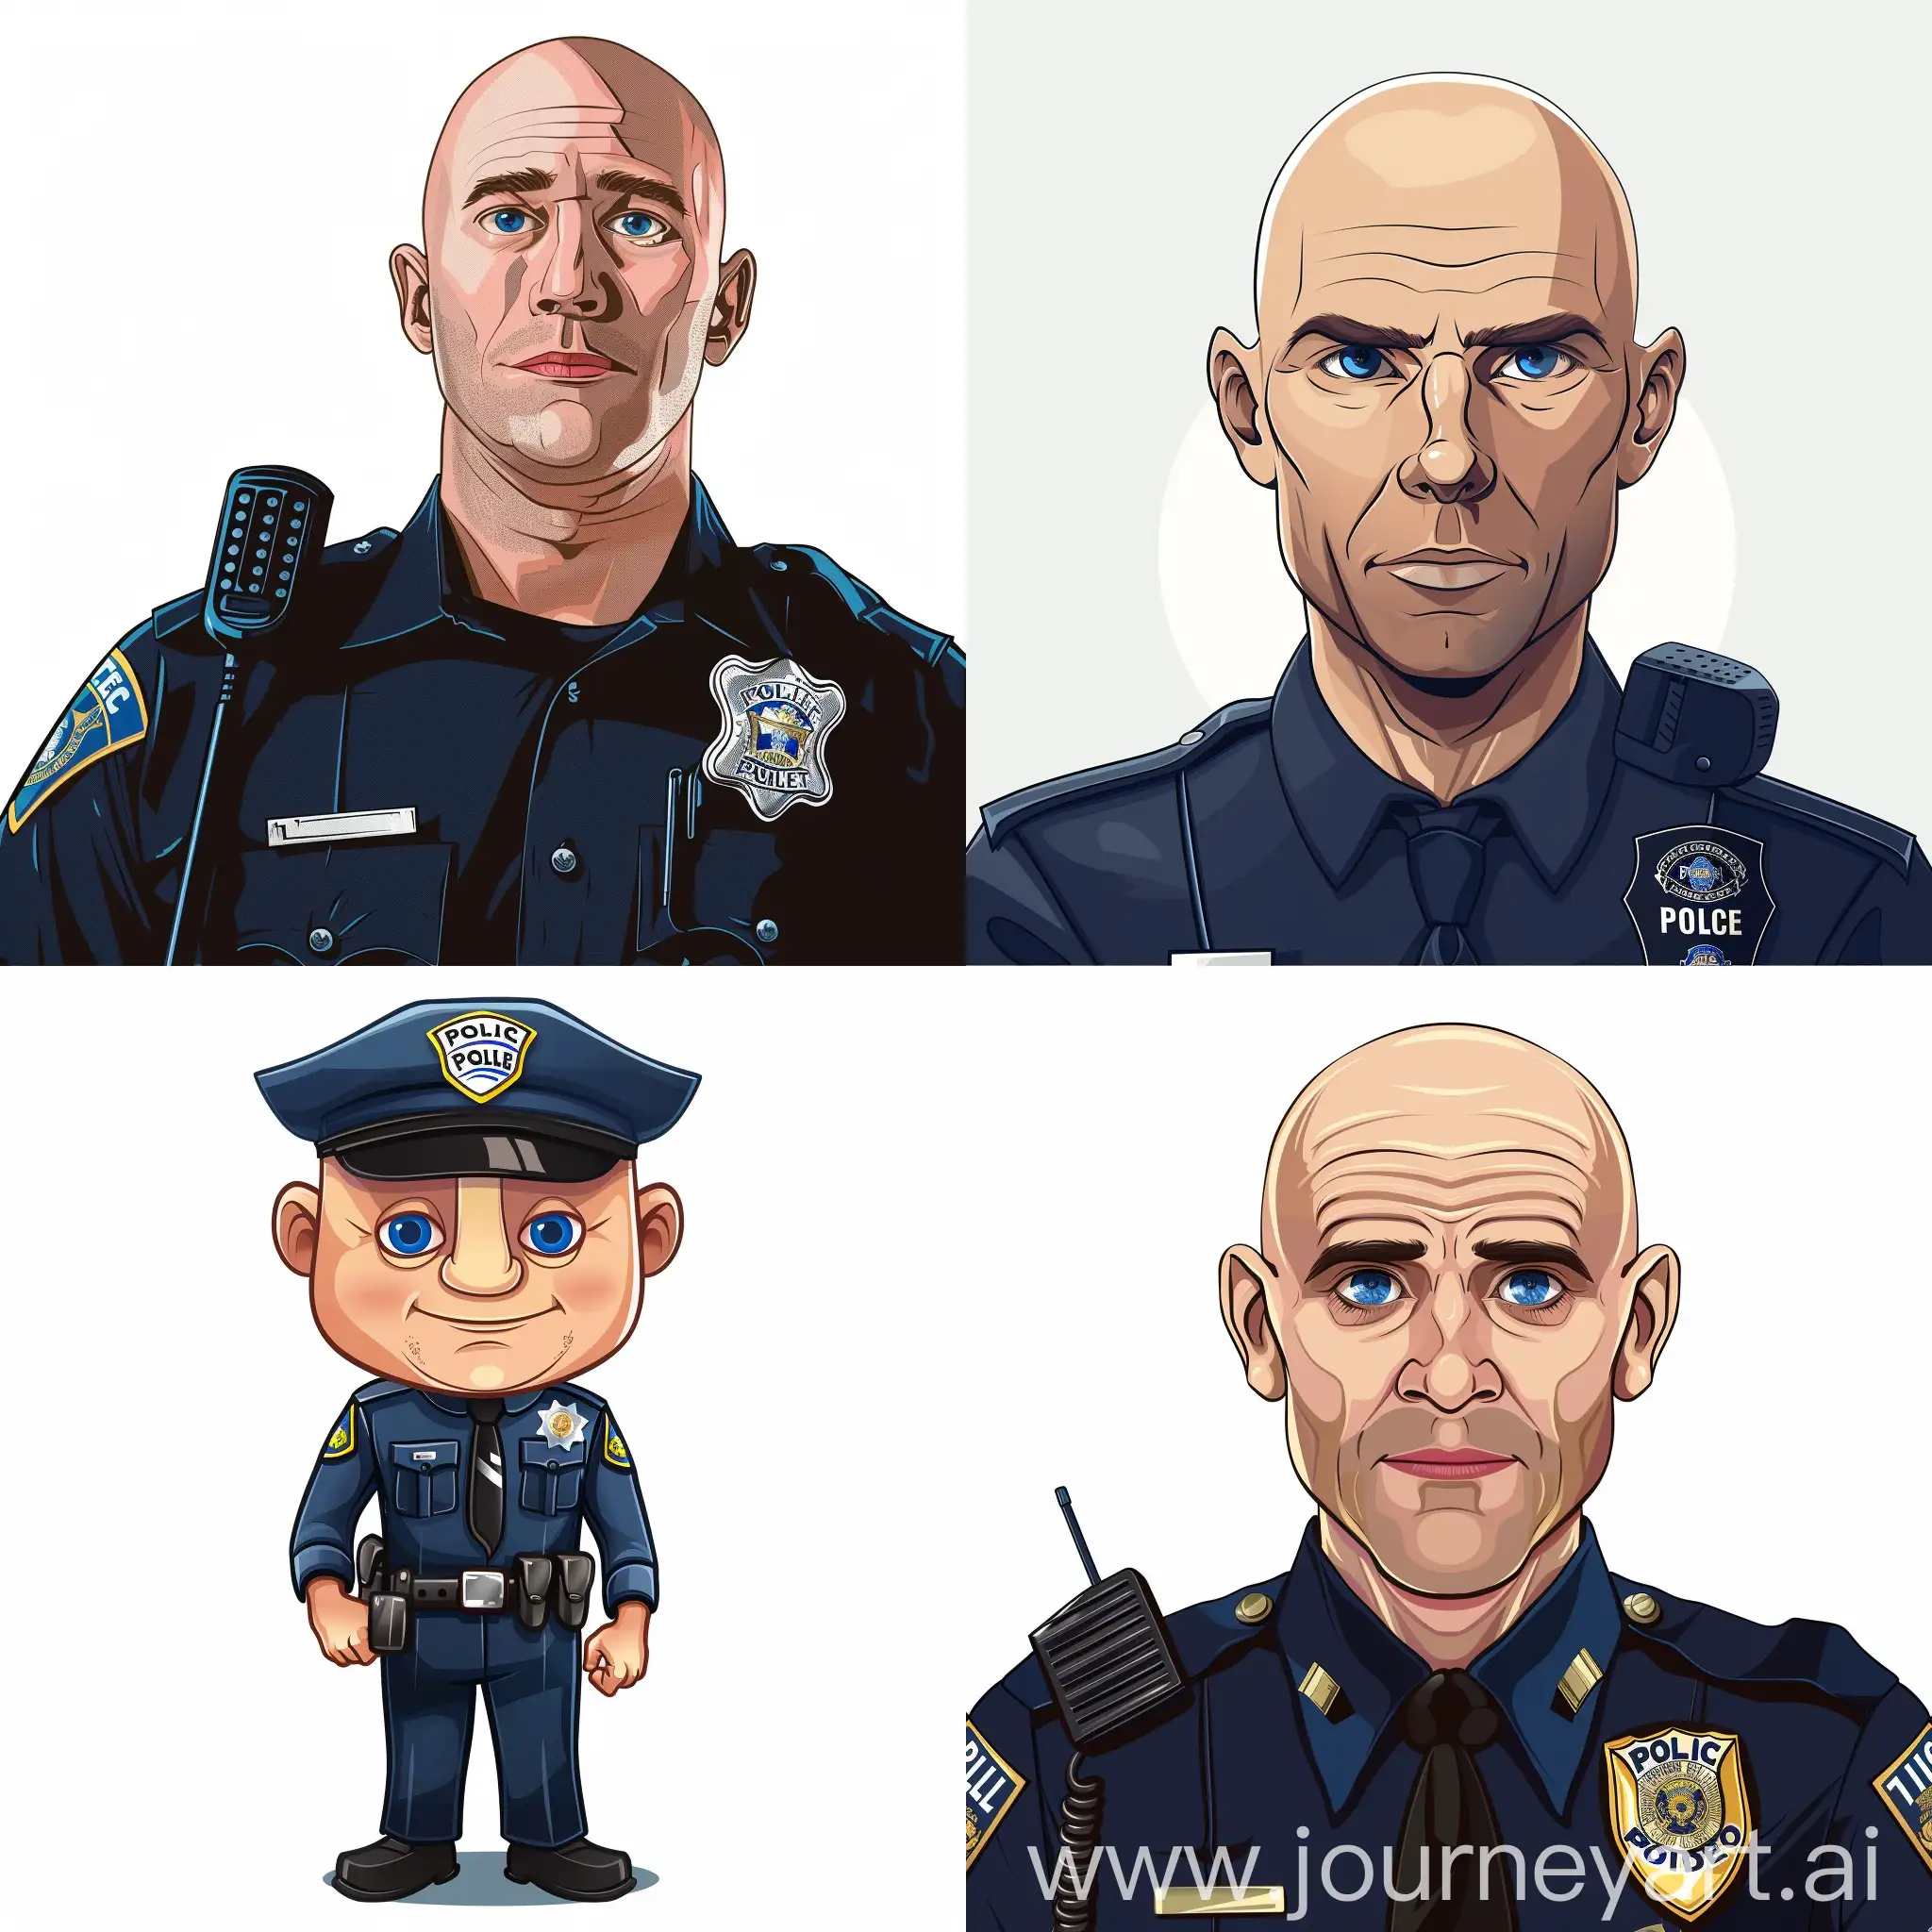 Bald-Police-Officer-with-WalkieTalkie-in-Minimalistic-2D-Illustration